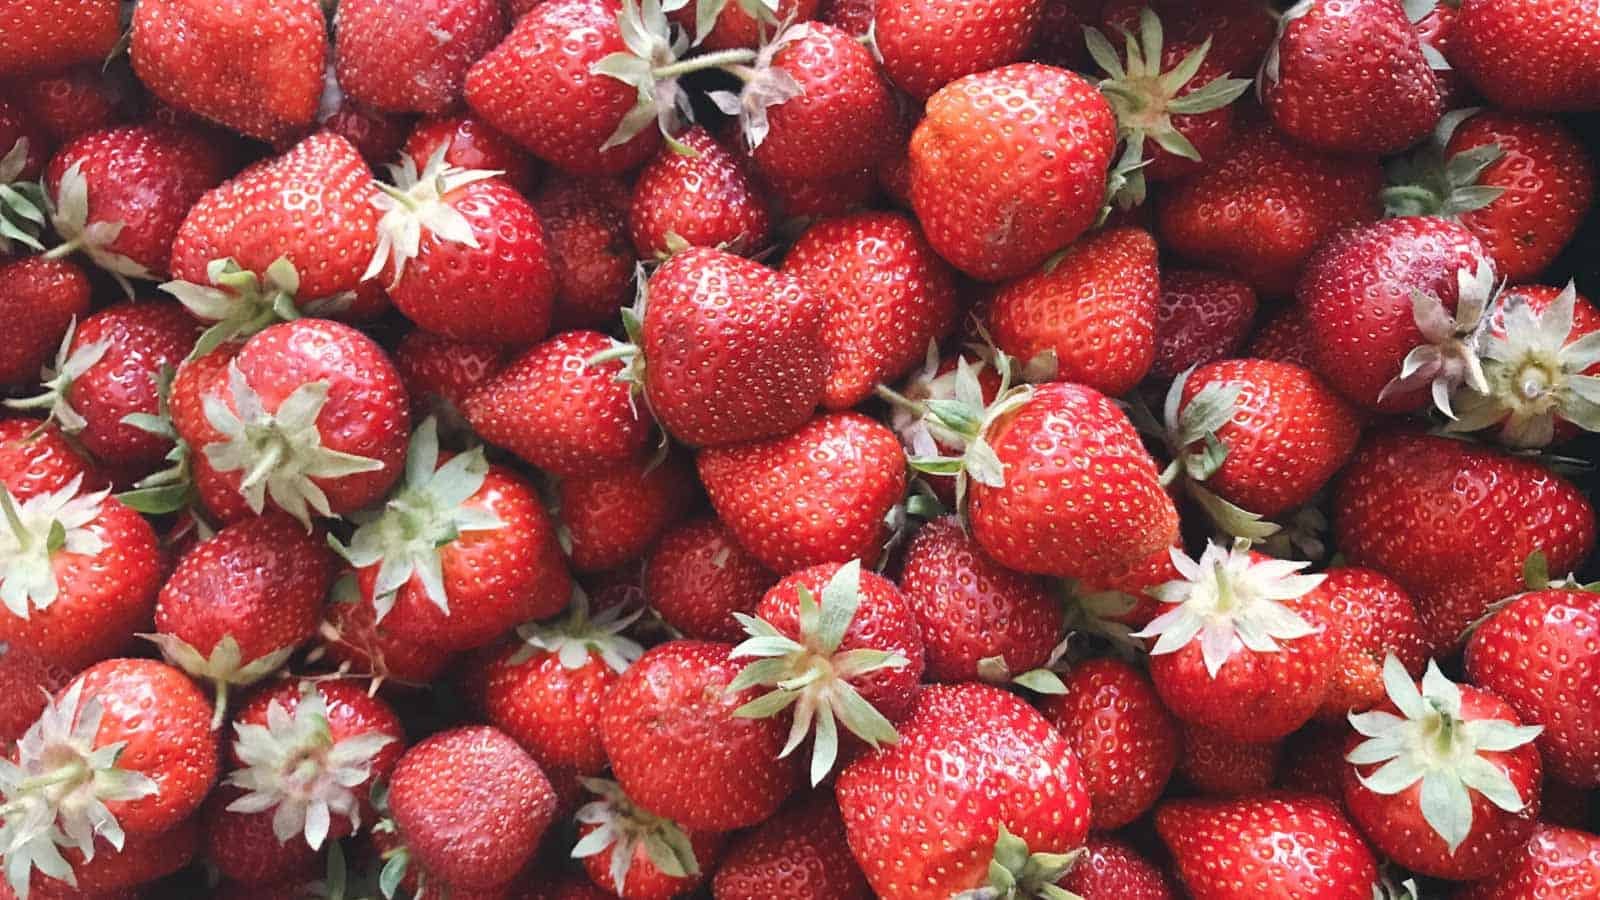 Try These 13 Strawberry Recipes to Kick Off Spring